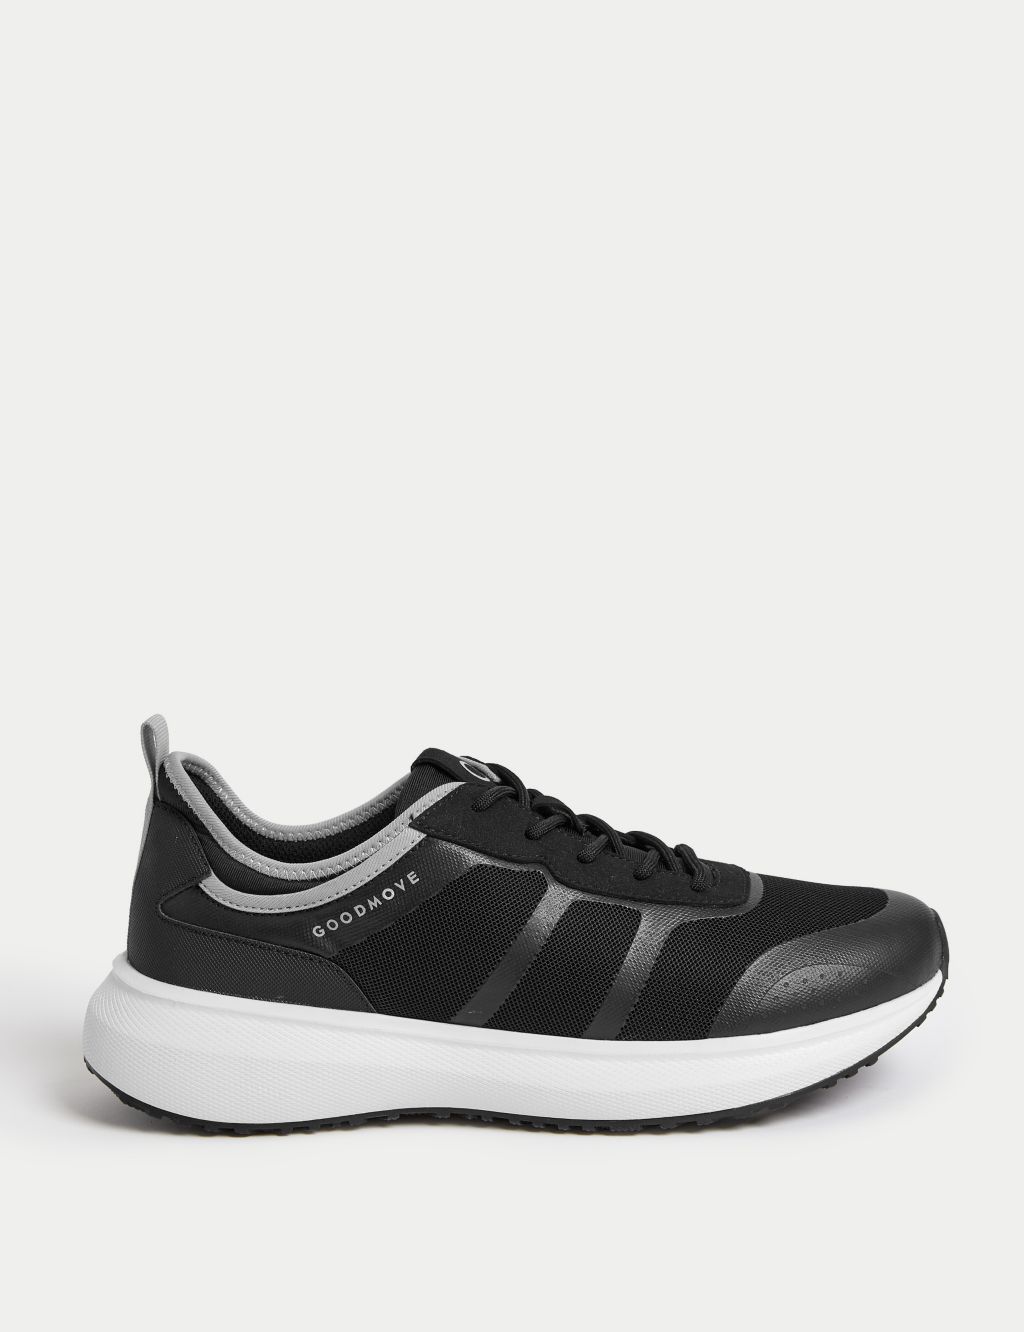 Lace Up Trainers image 1